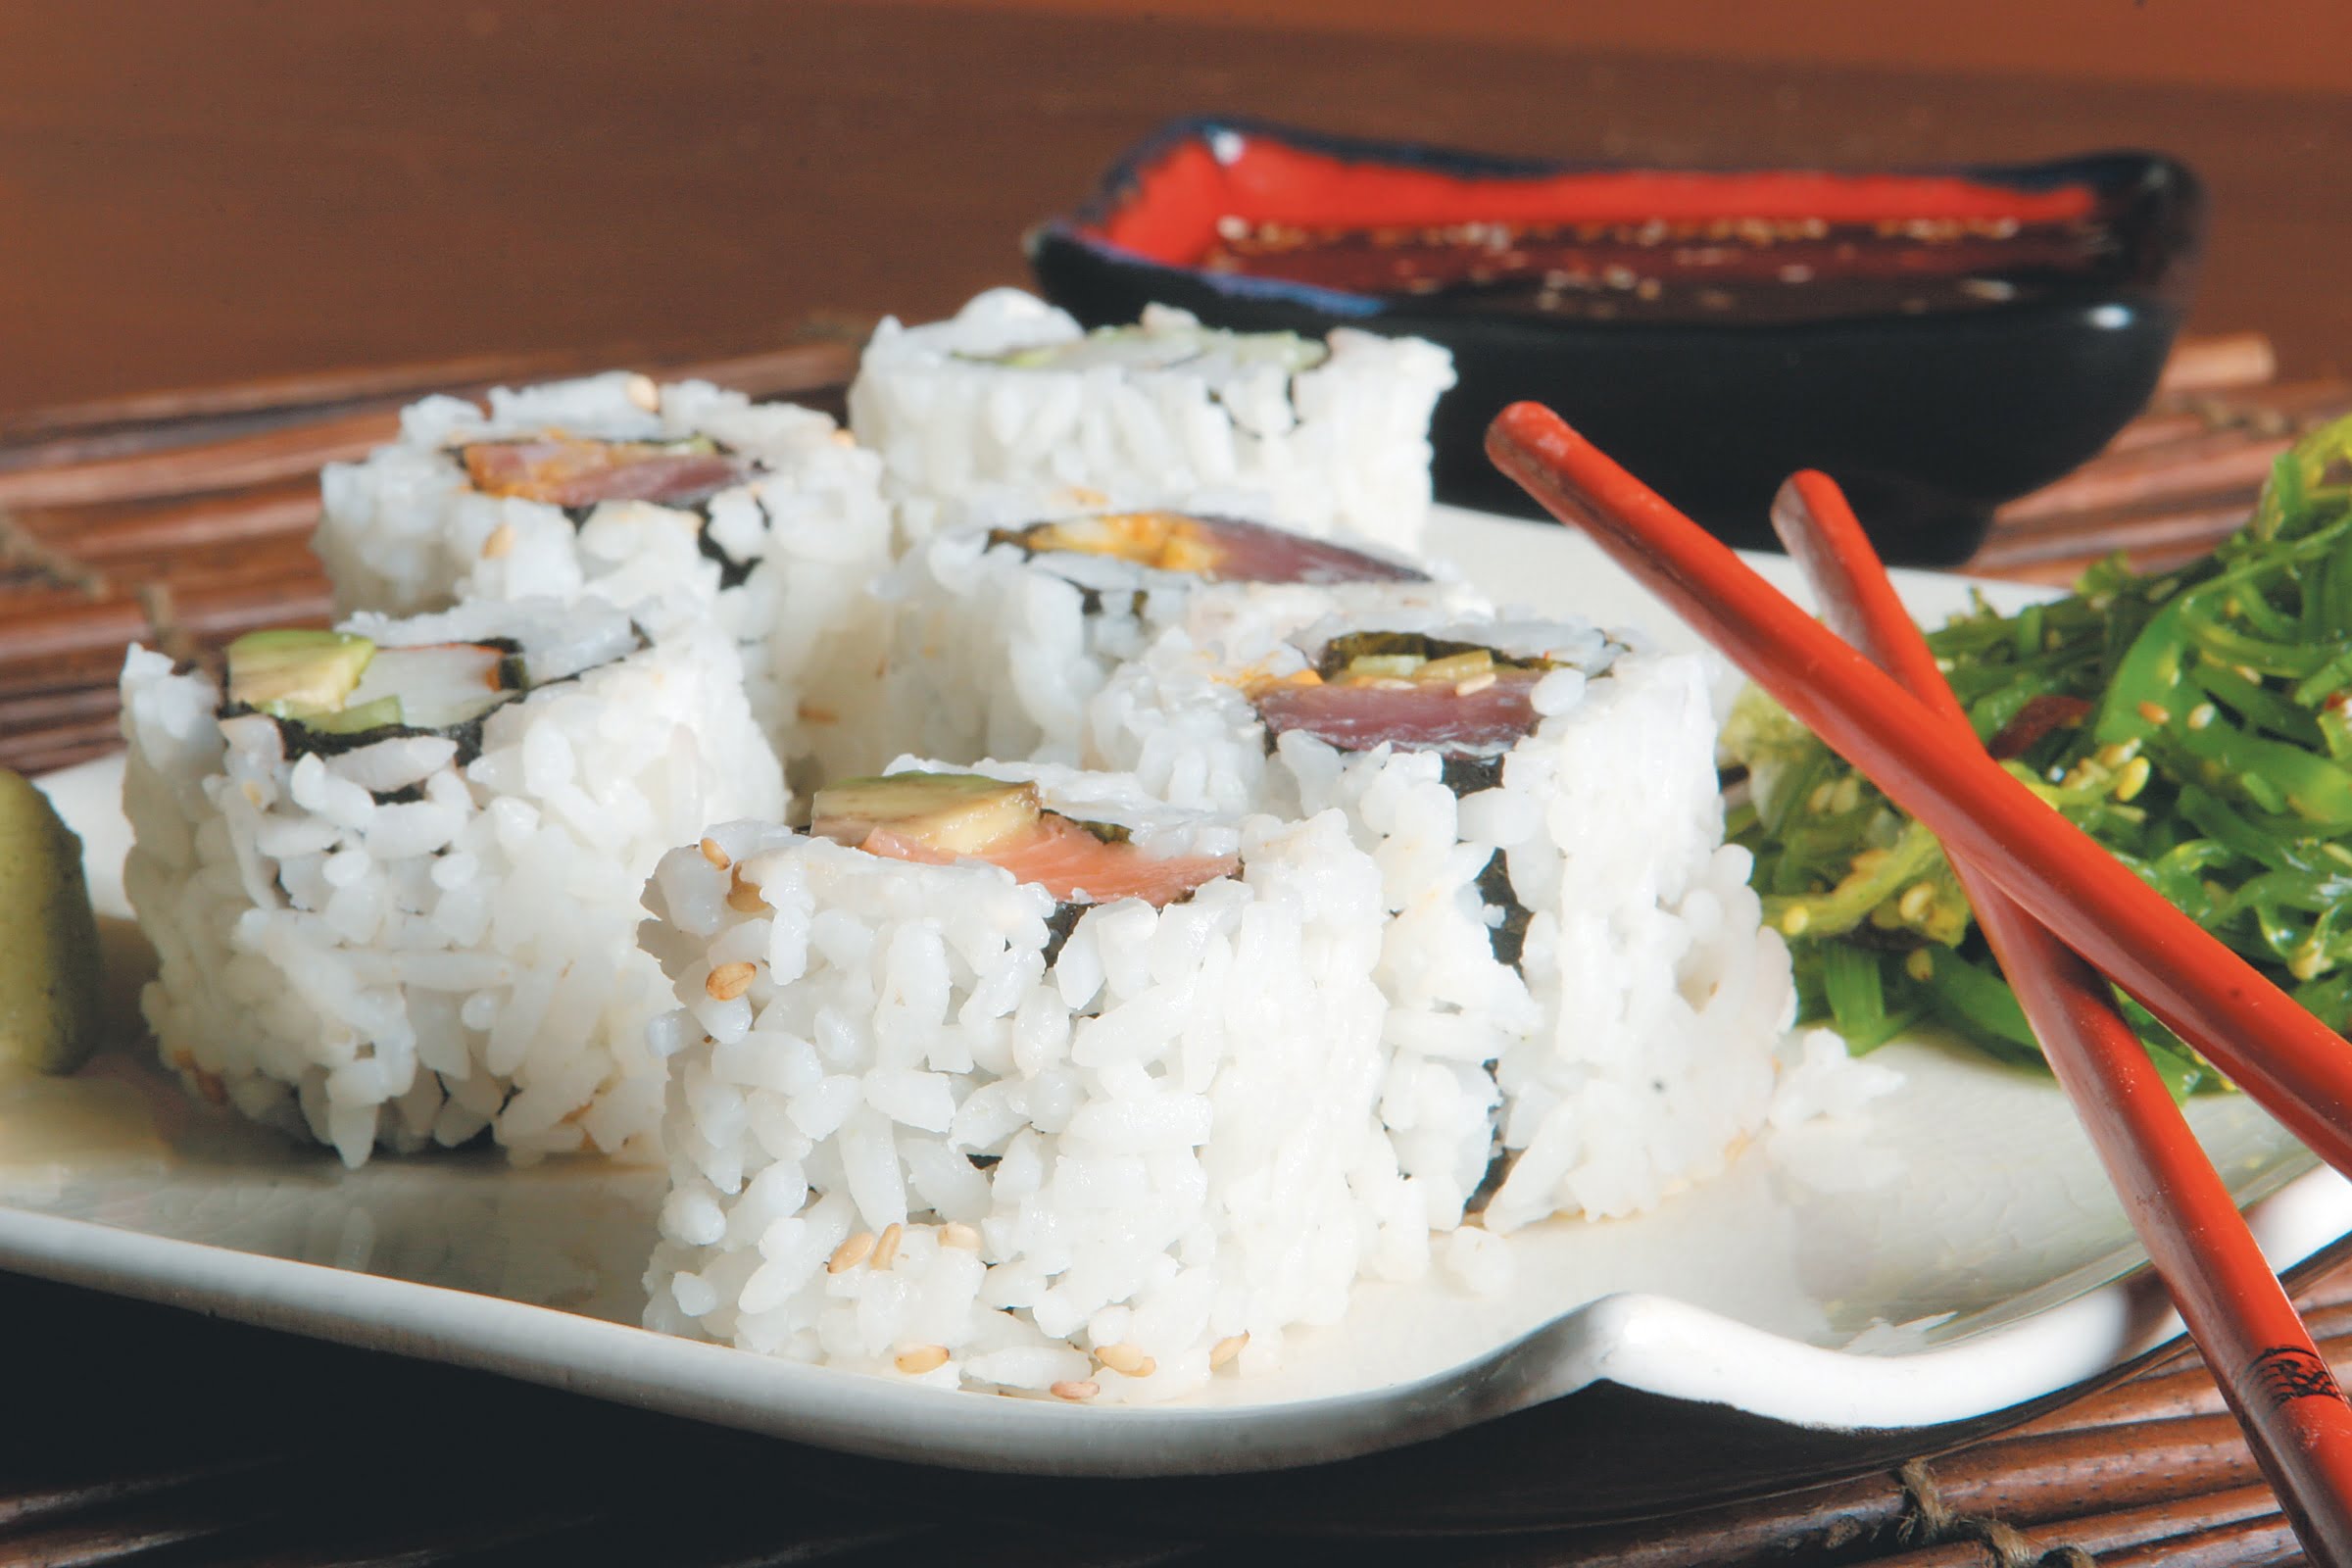 Raw Sushi on White Plate with Chopsticks Food Picture